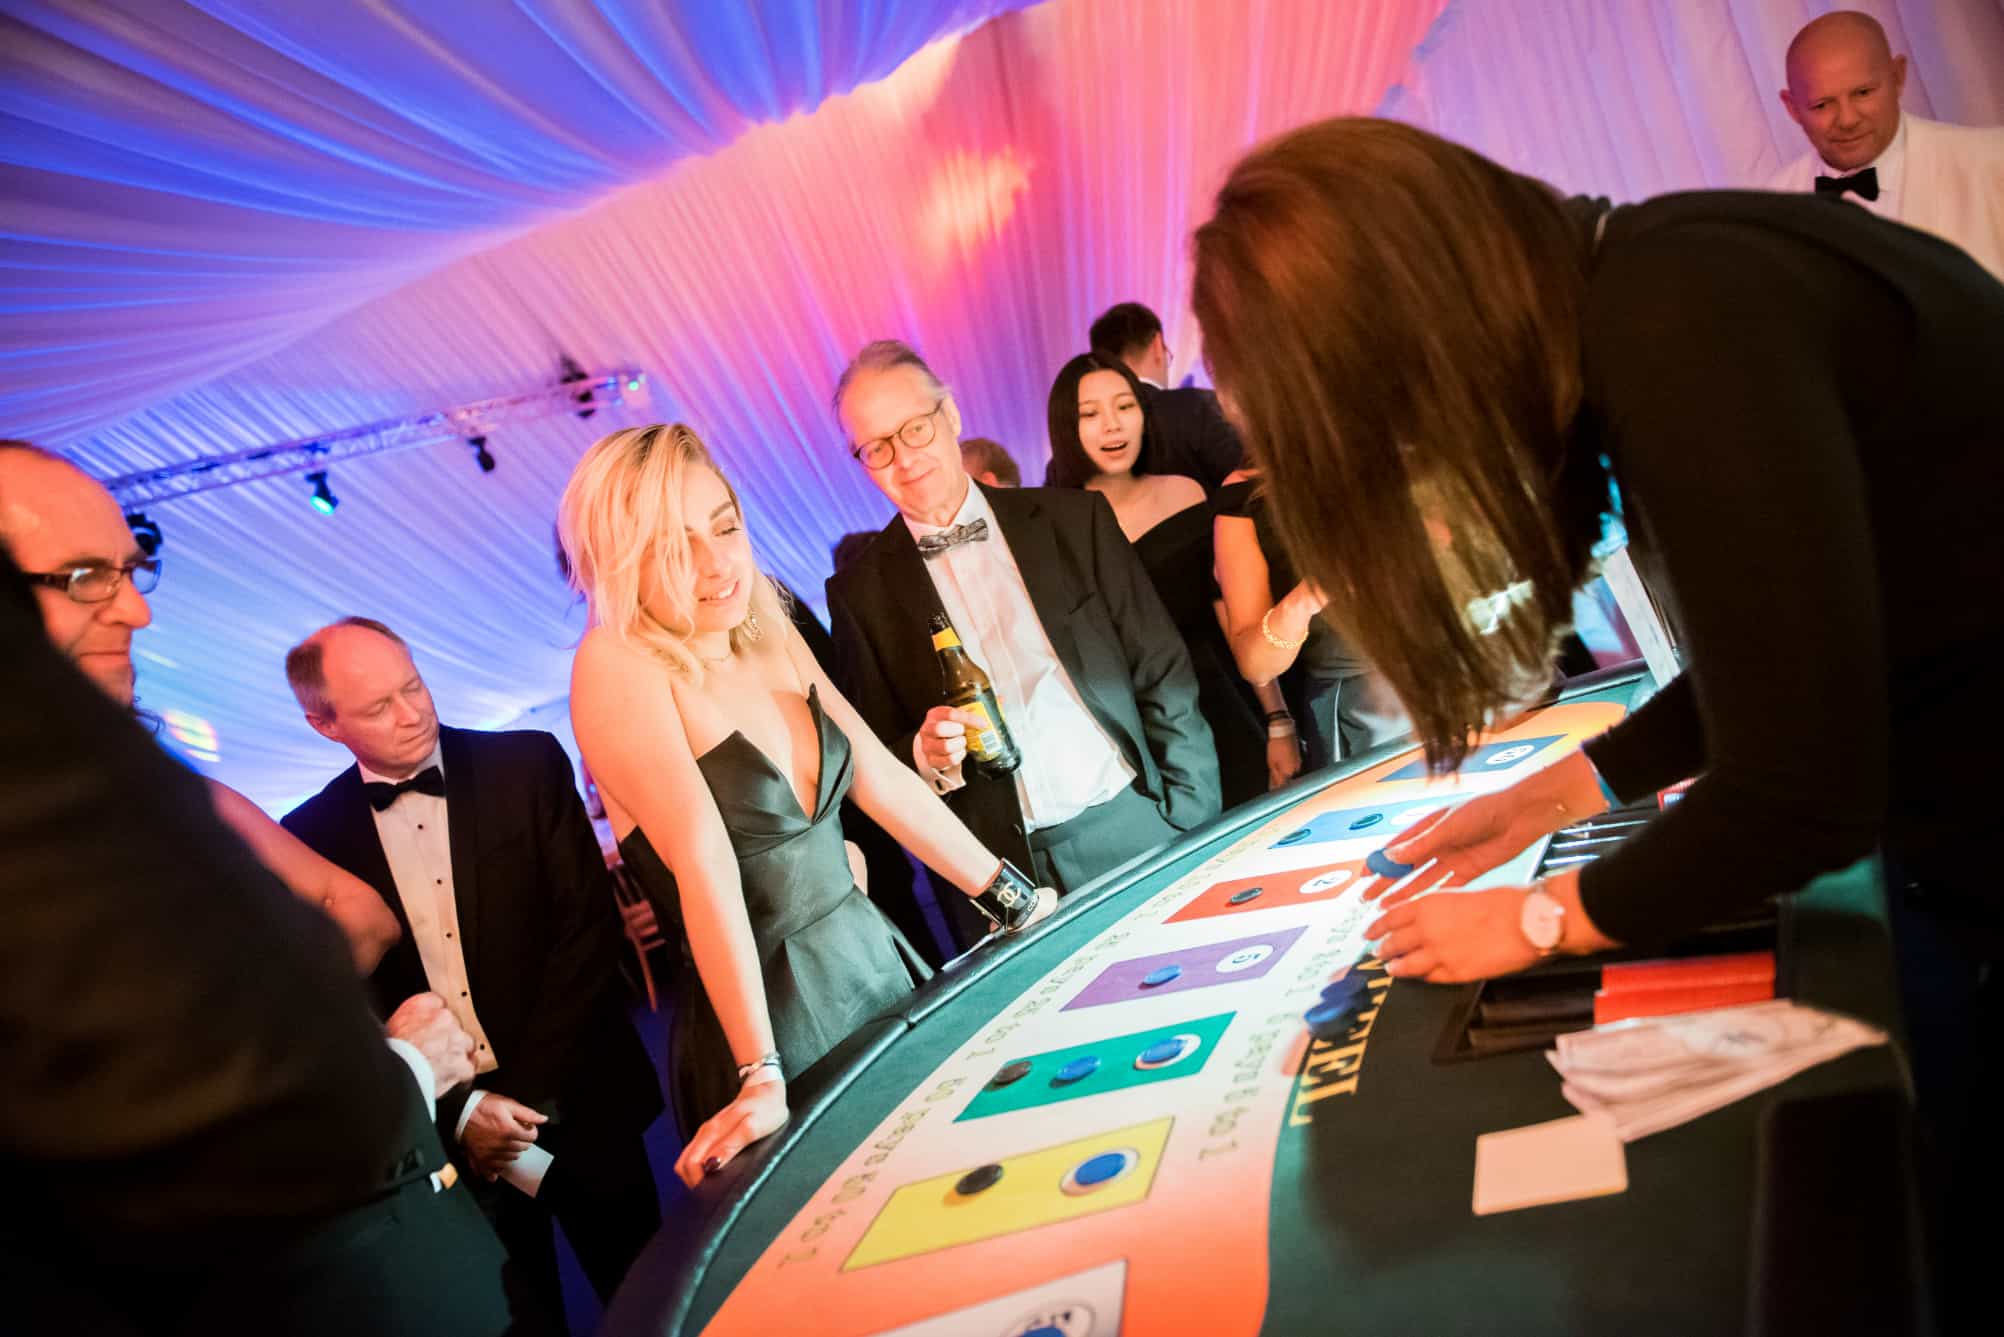 Casino tables at Clifton College Ball